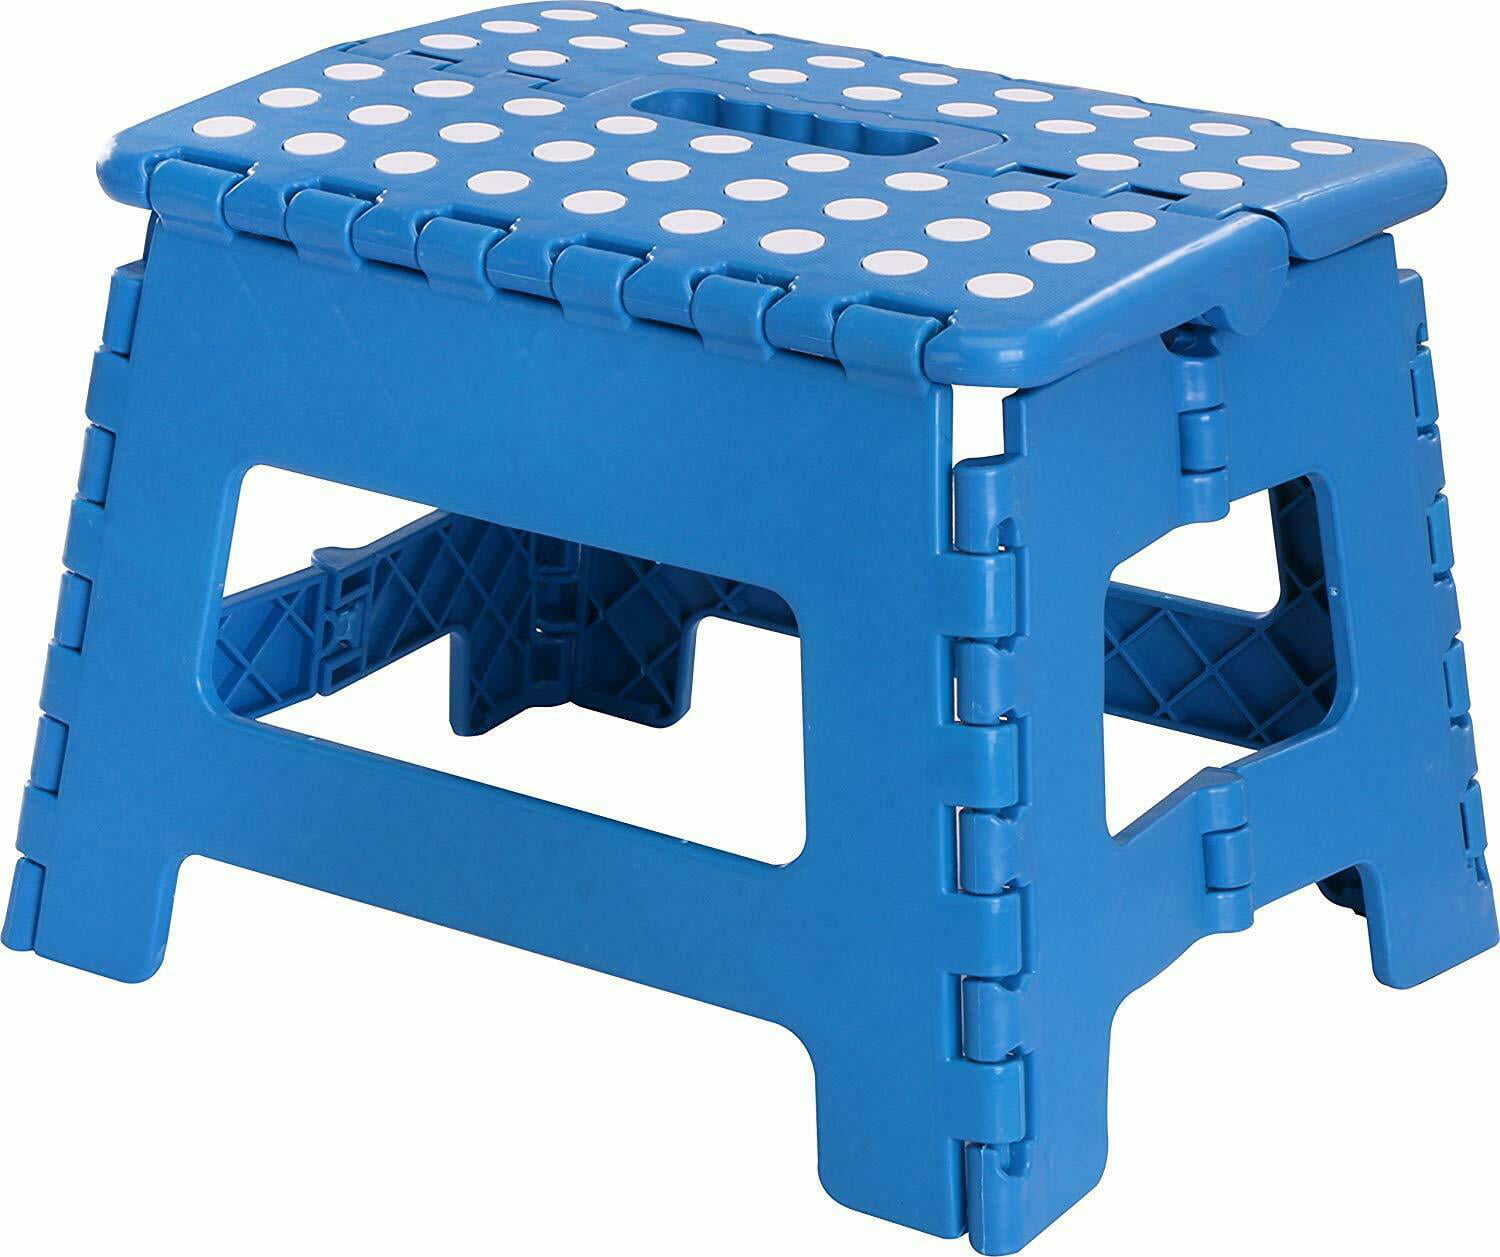 Small Folding Step Stool Assorted Colours Capacity of 150 kg Polka Dots 